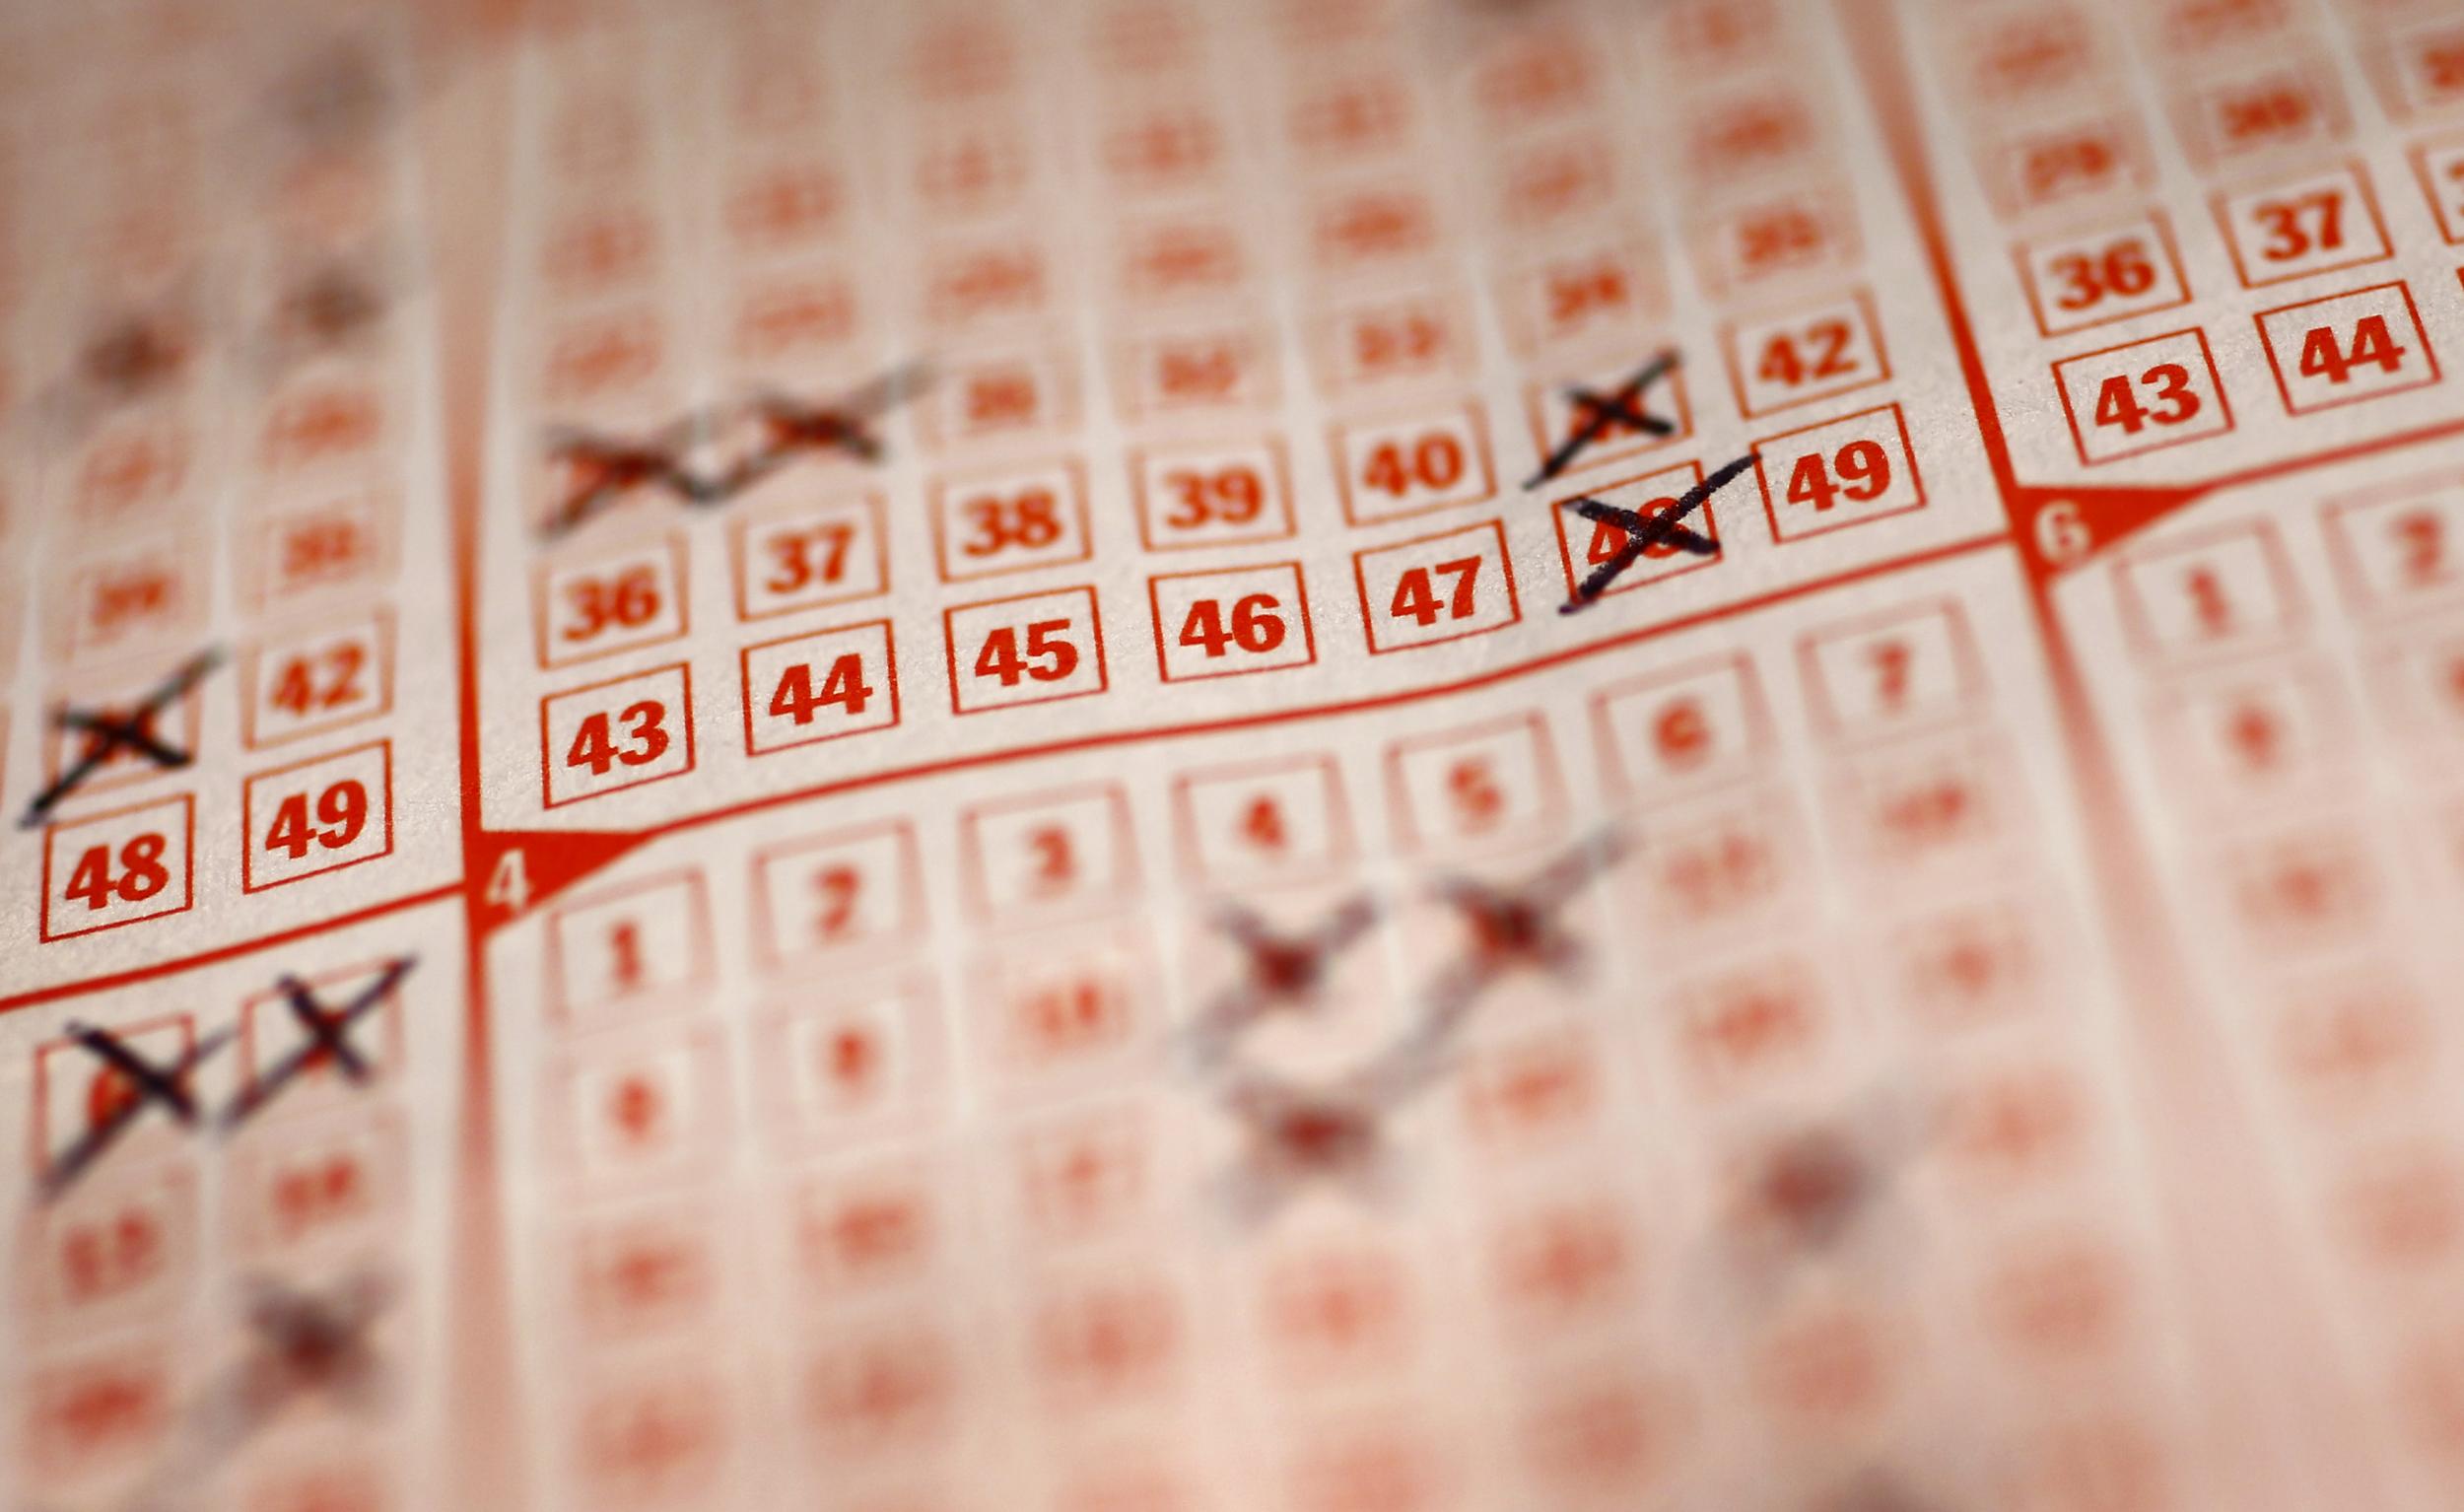 Lottery winnings could actually damage the economy, not benefit it